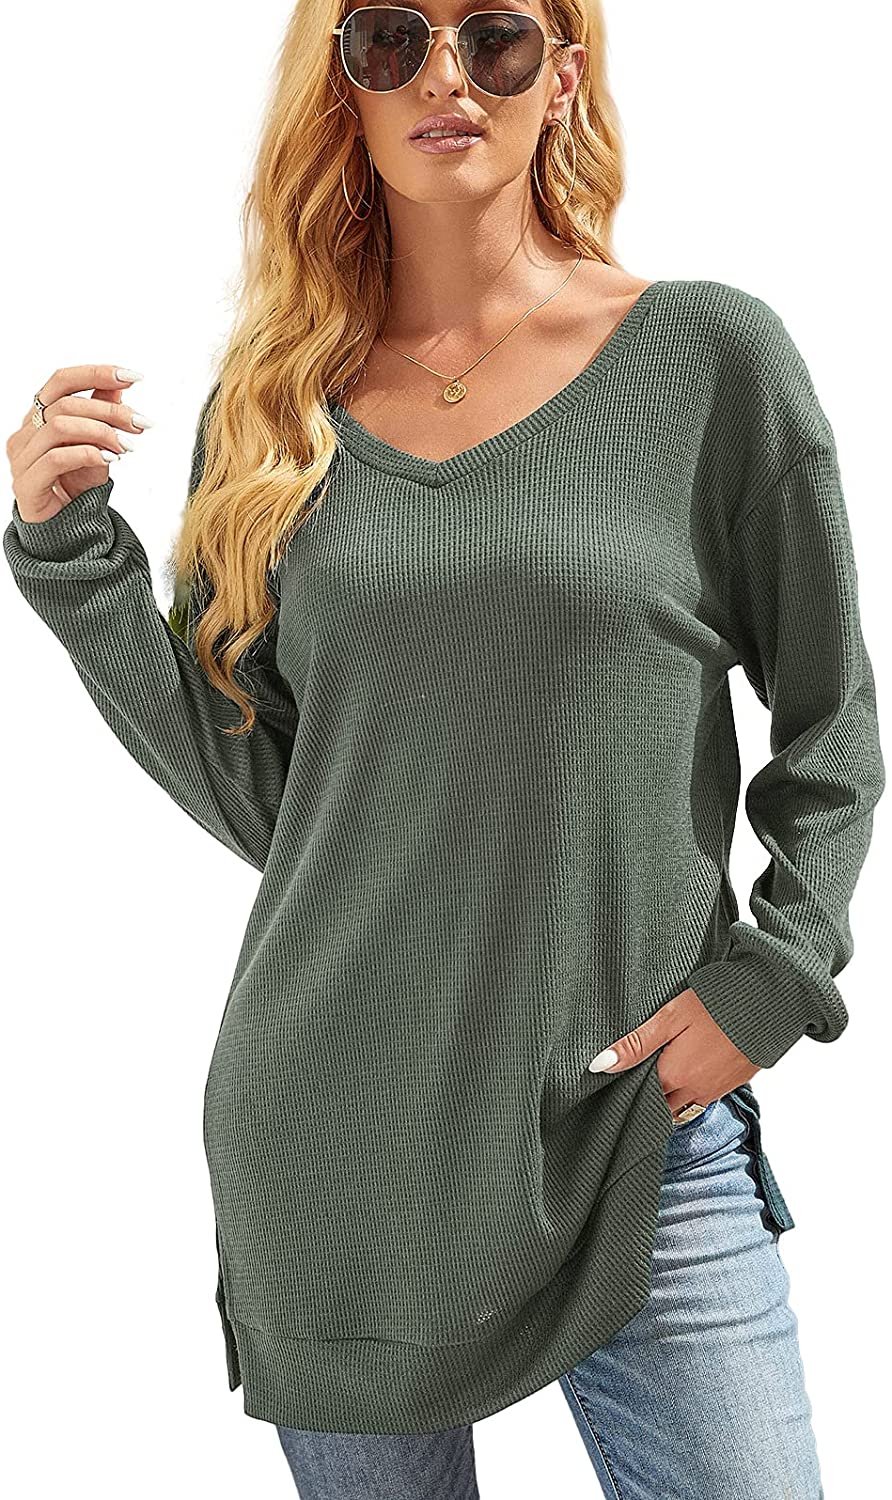 XUERRY Womens Casual V-NECK Long Sleeves Pocket Solid Color Sweatshirt Tunics Blouse Tops 